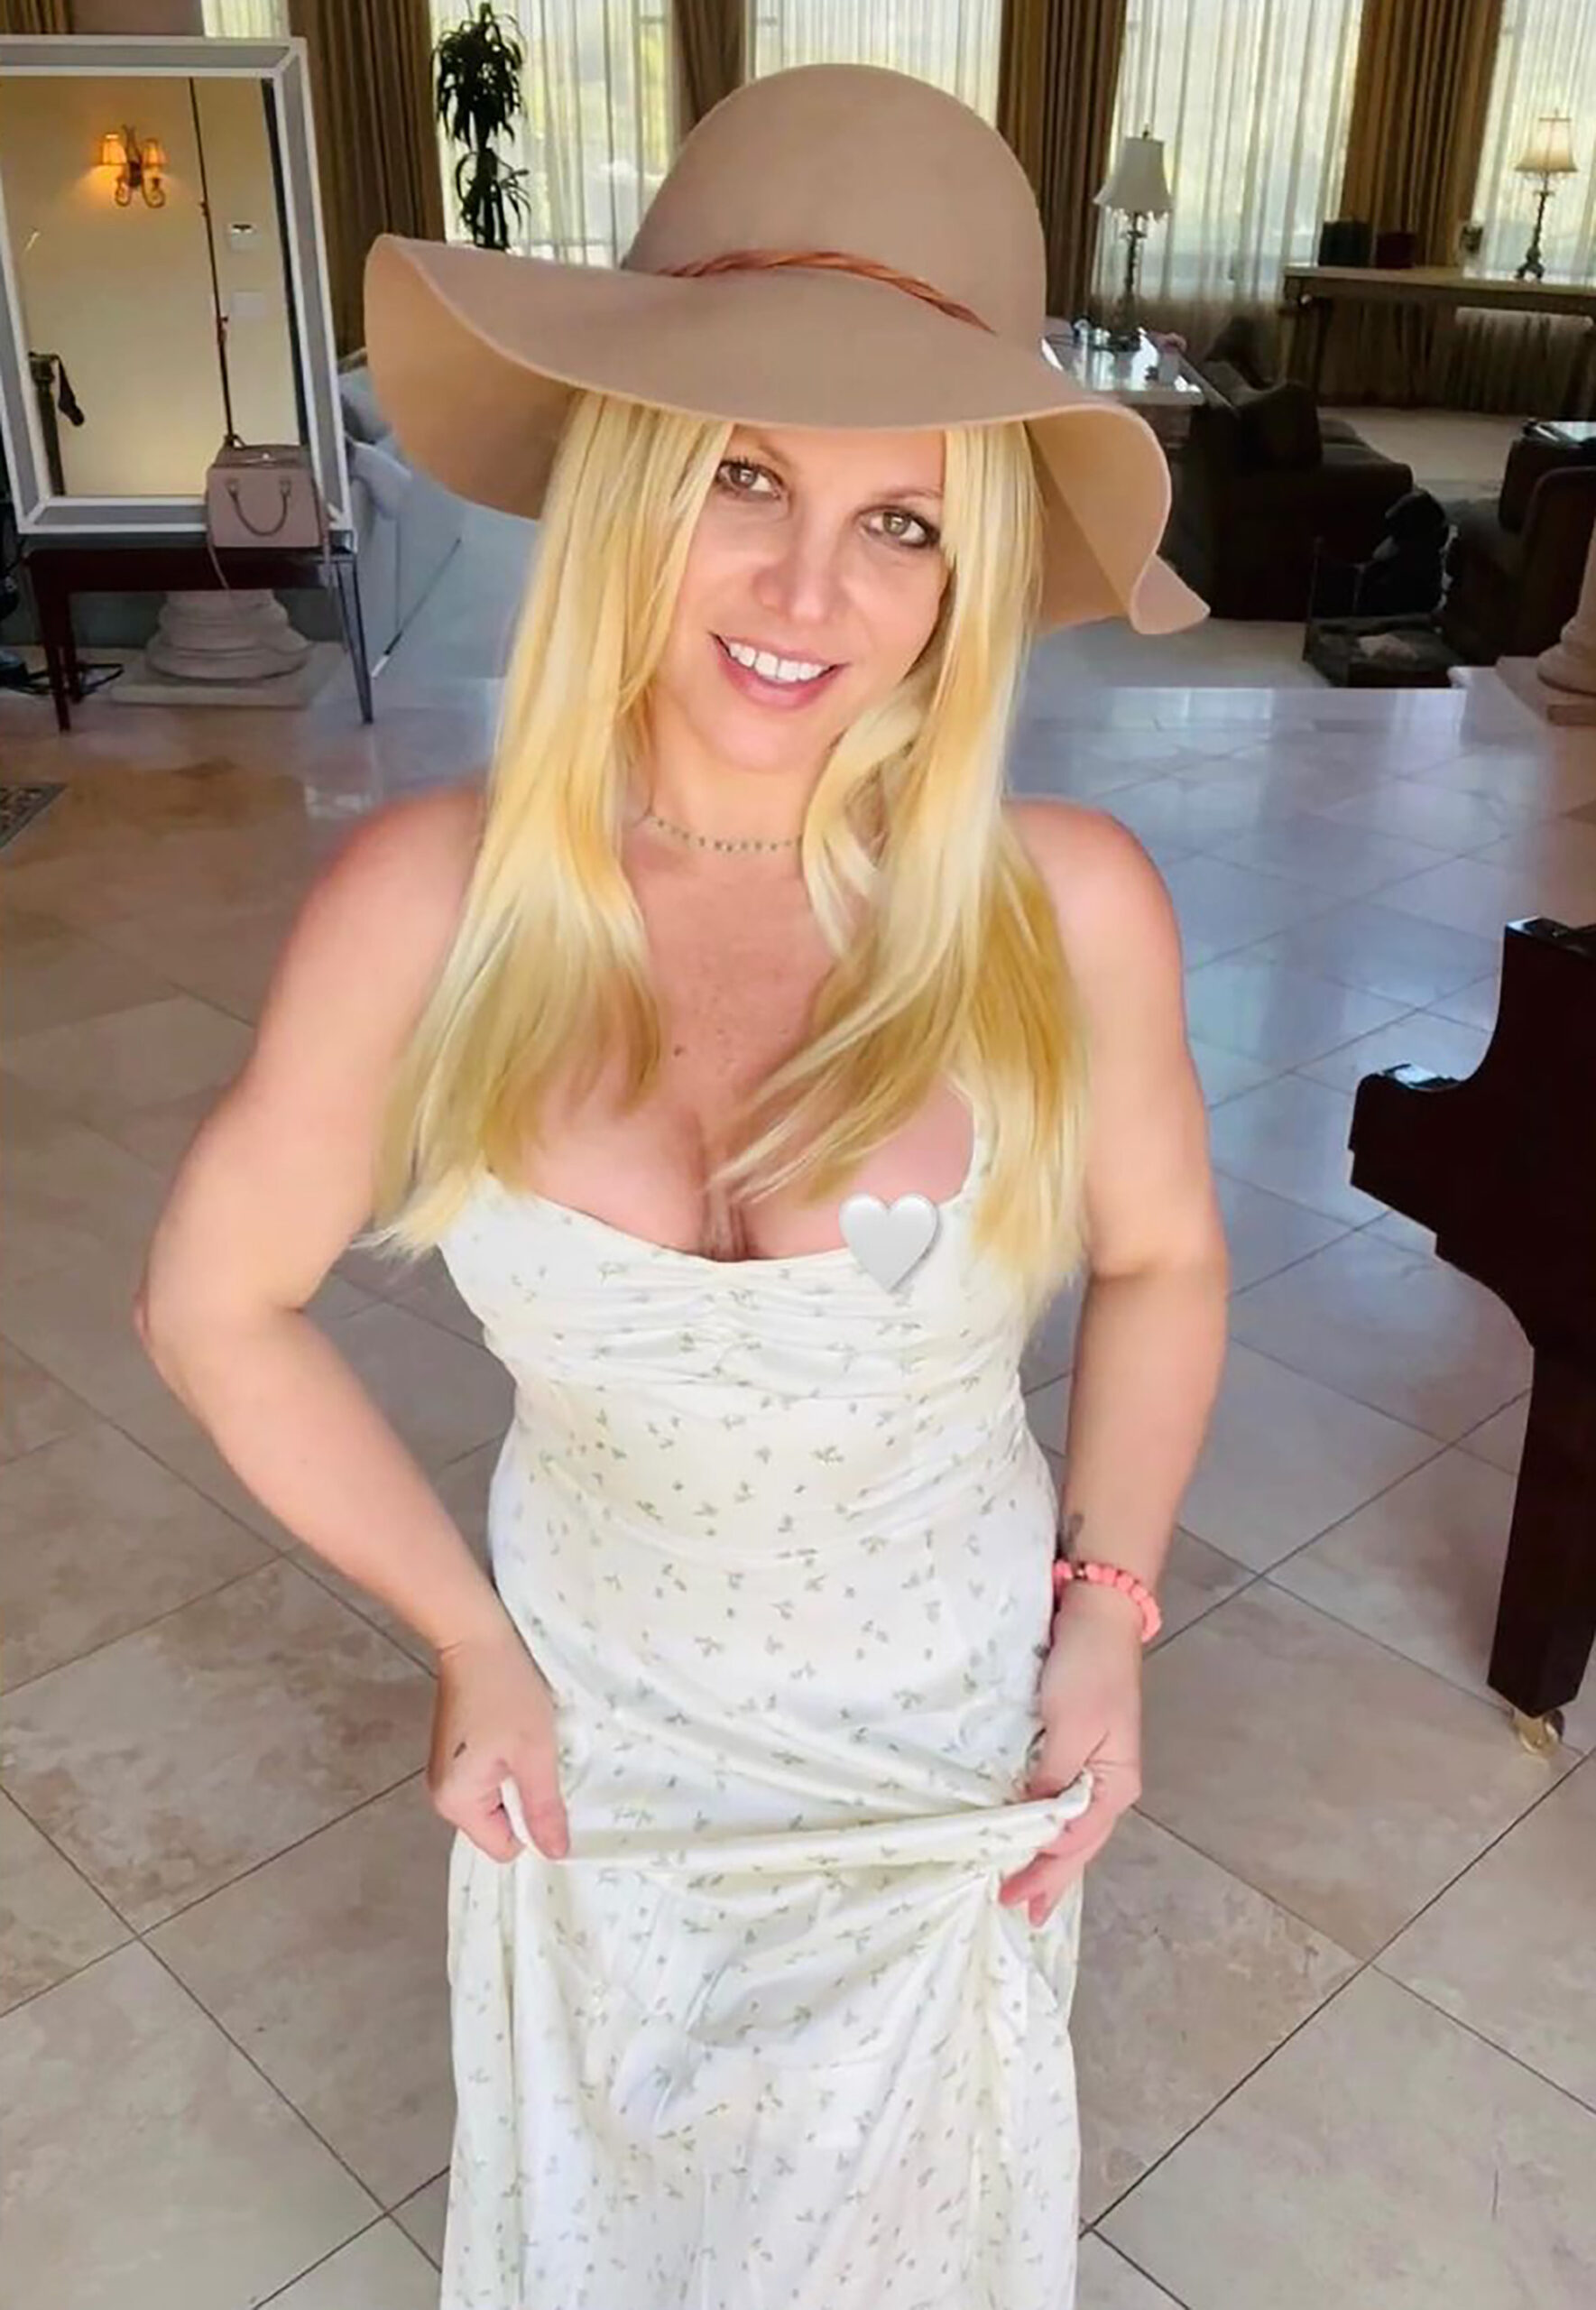 Britney Spears' New Connection: Inside Her Life After Splitting with Sam Asghari